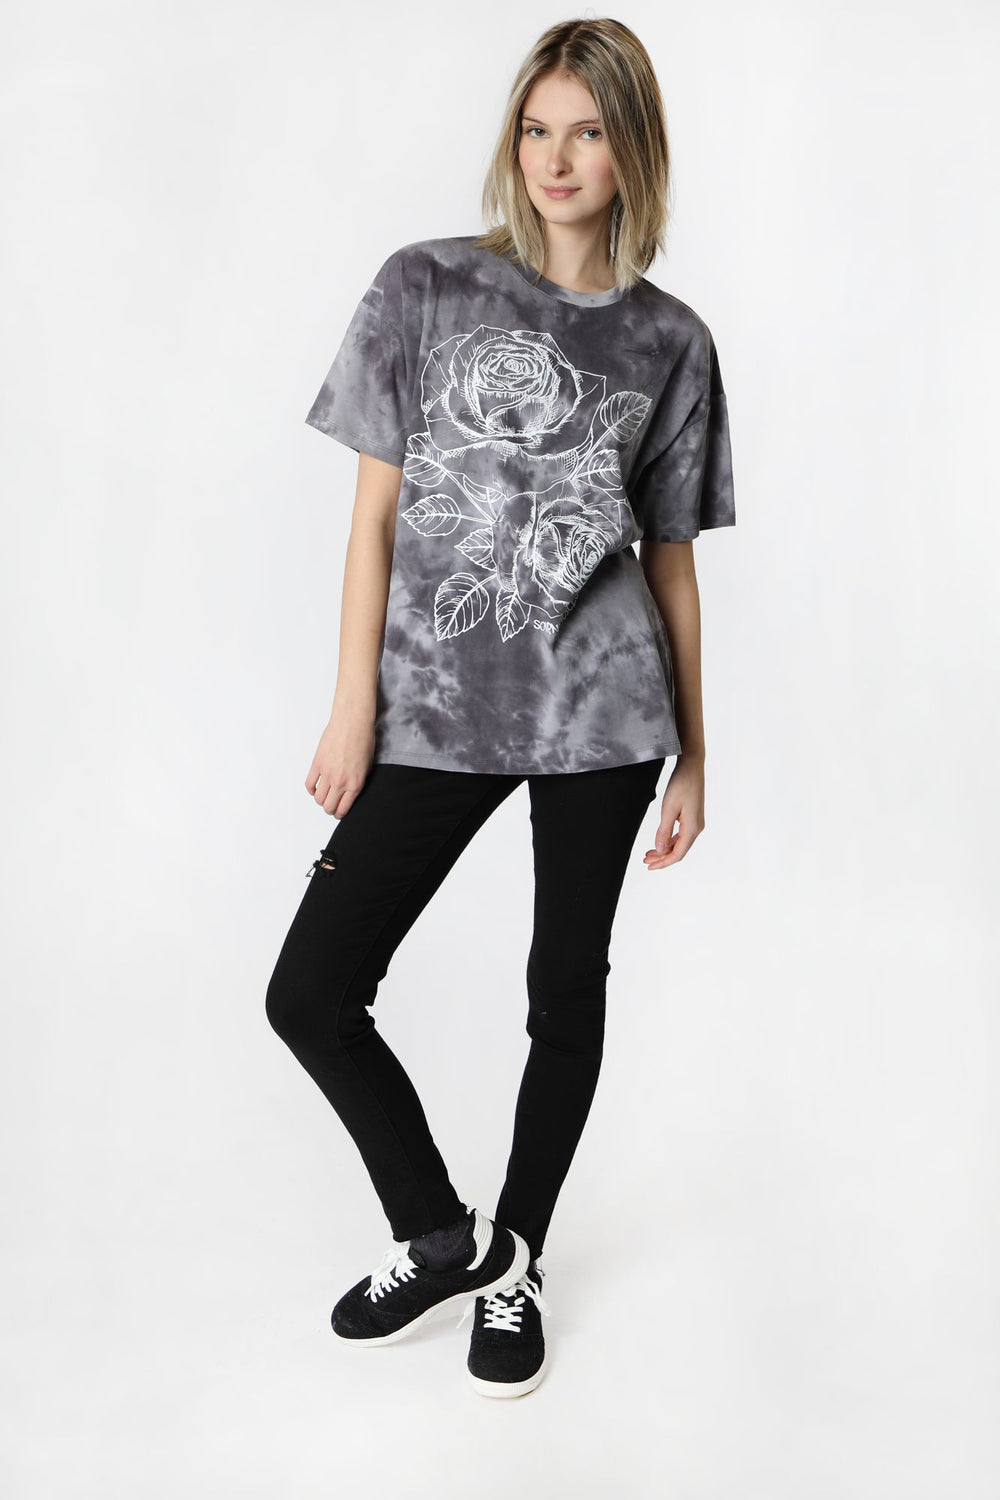 Womens Sovrn Voices Oversized Graphic T-Shirt Womens Sovrn Voices Oversized Graphic T-Shirt